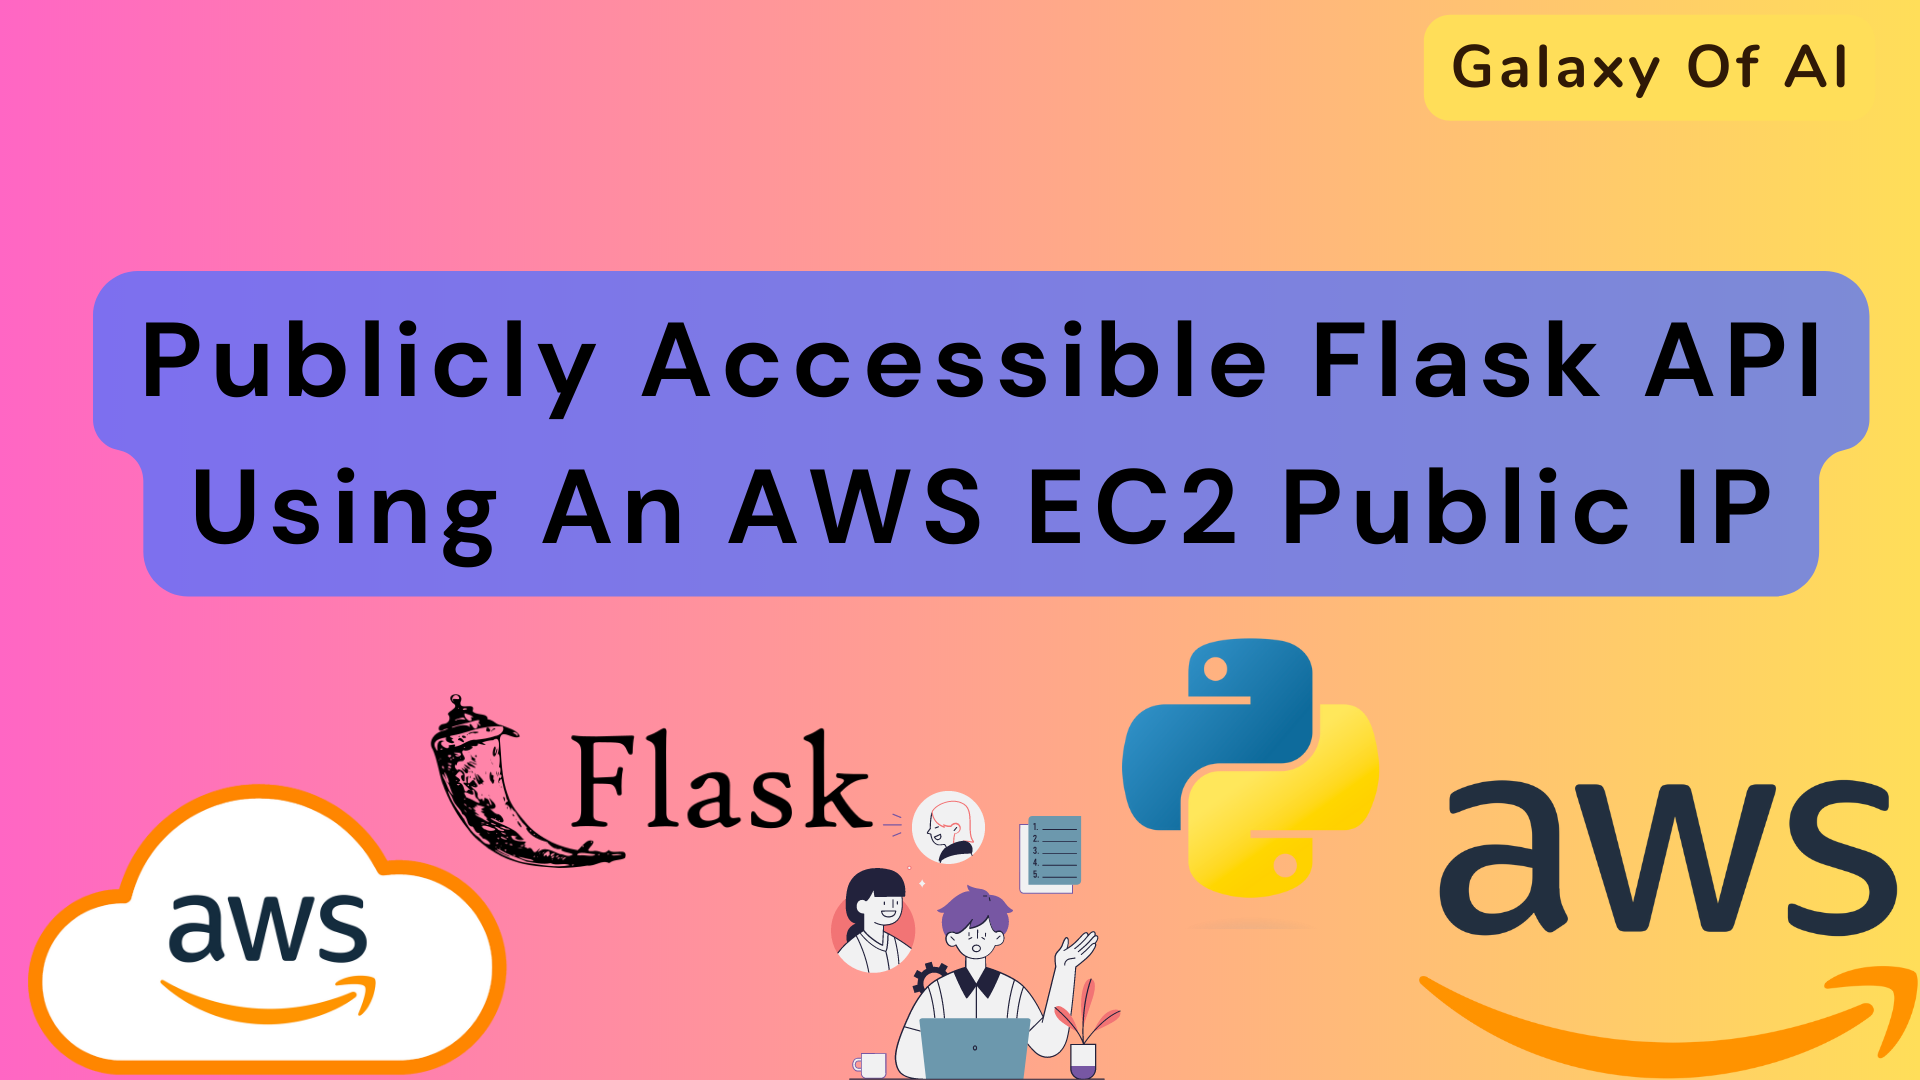 Flask API Publicly Accessible Using an AWS EC2 Public IP address